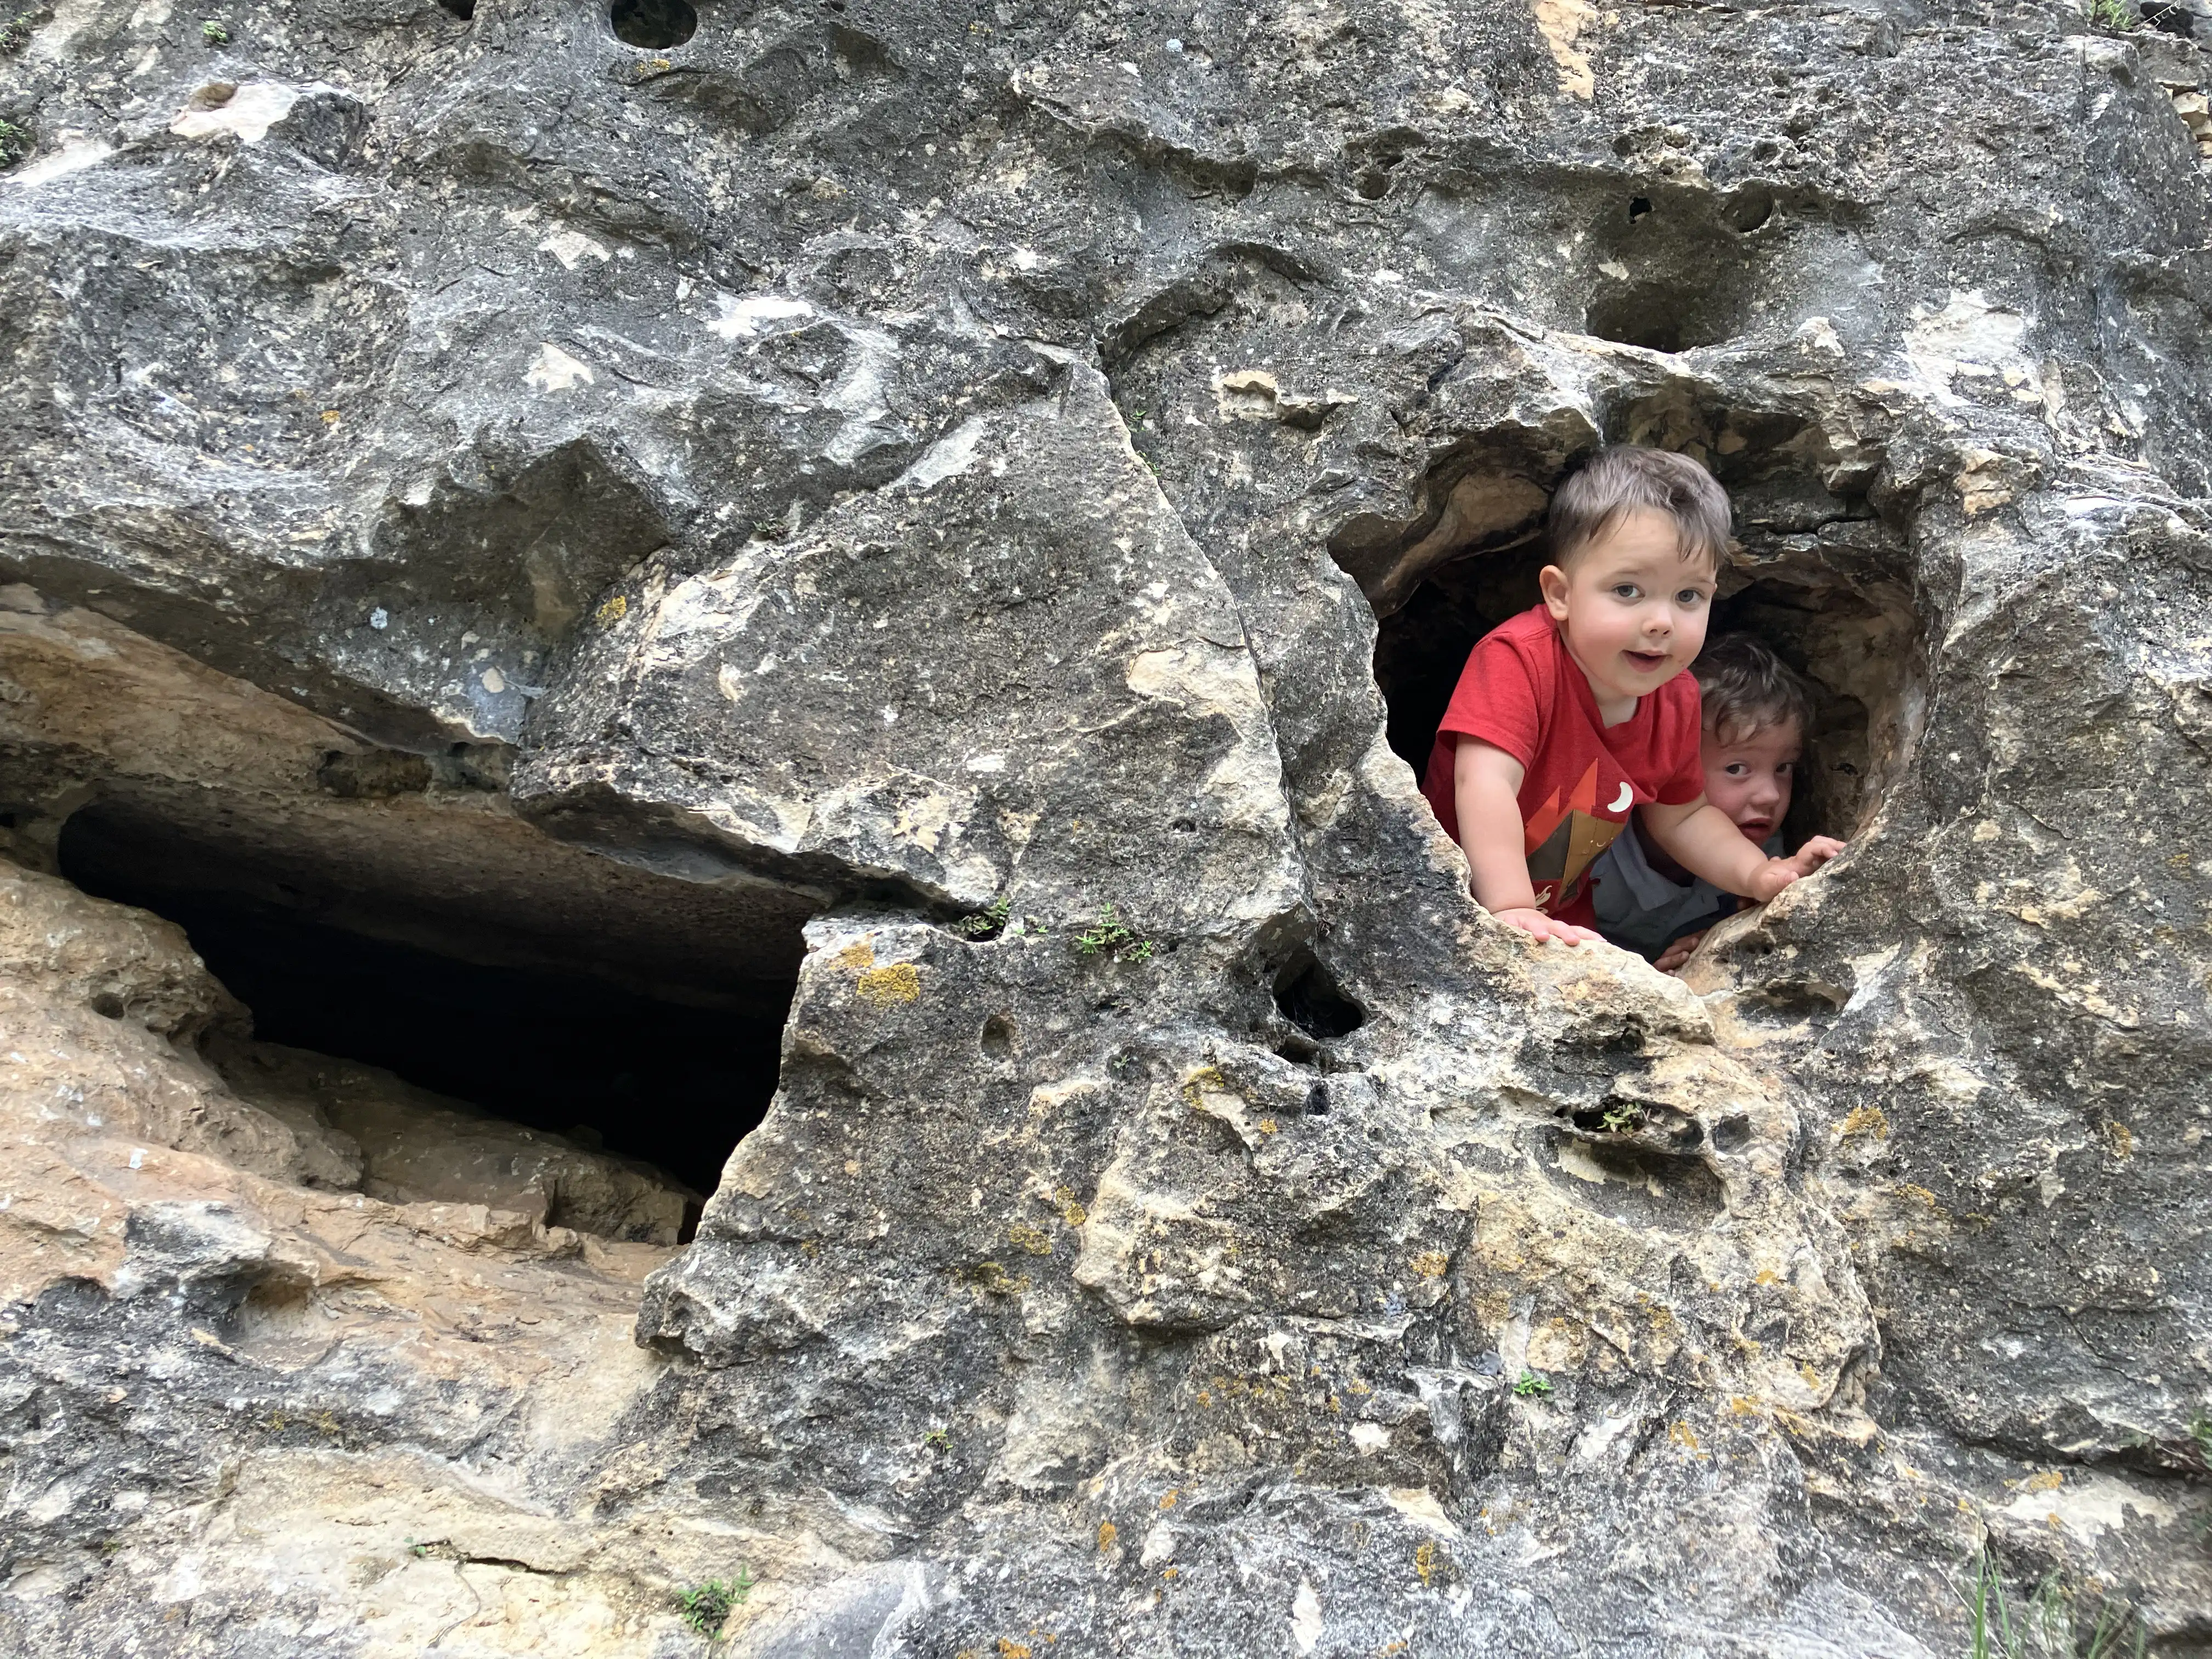 Graham and Royal peeking out from a small cave high up on a rock face.